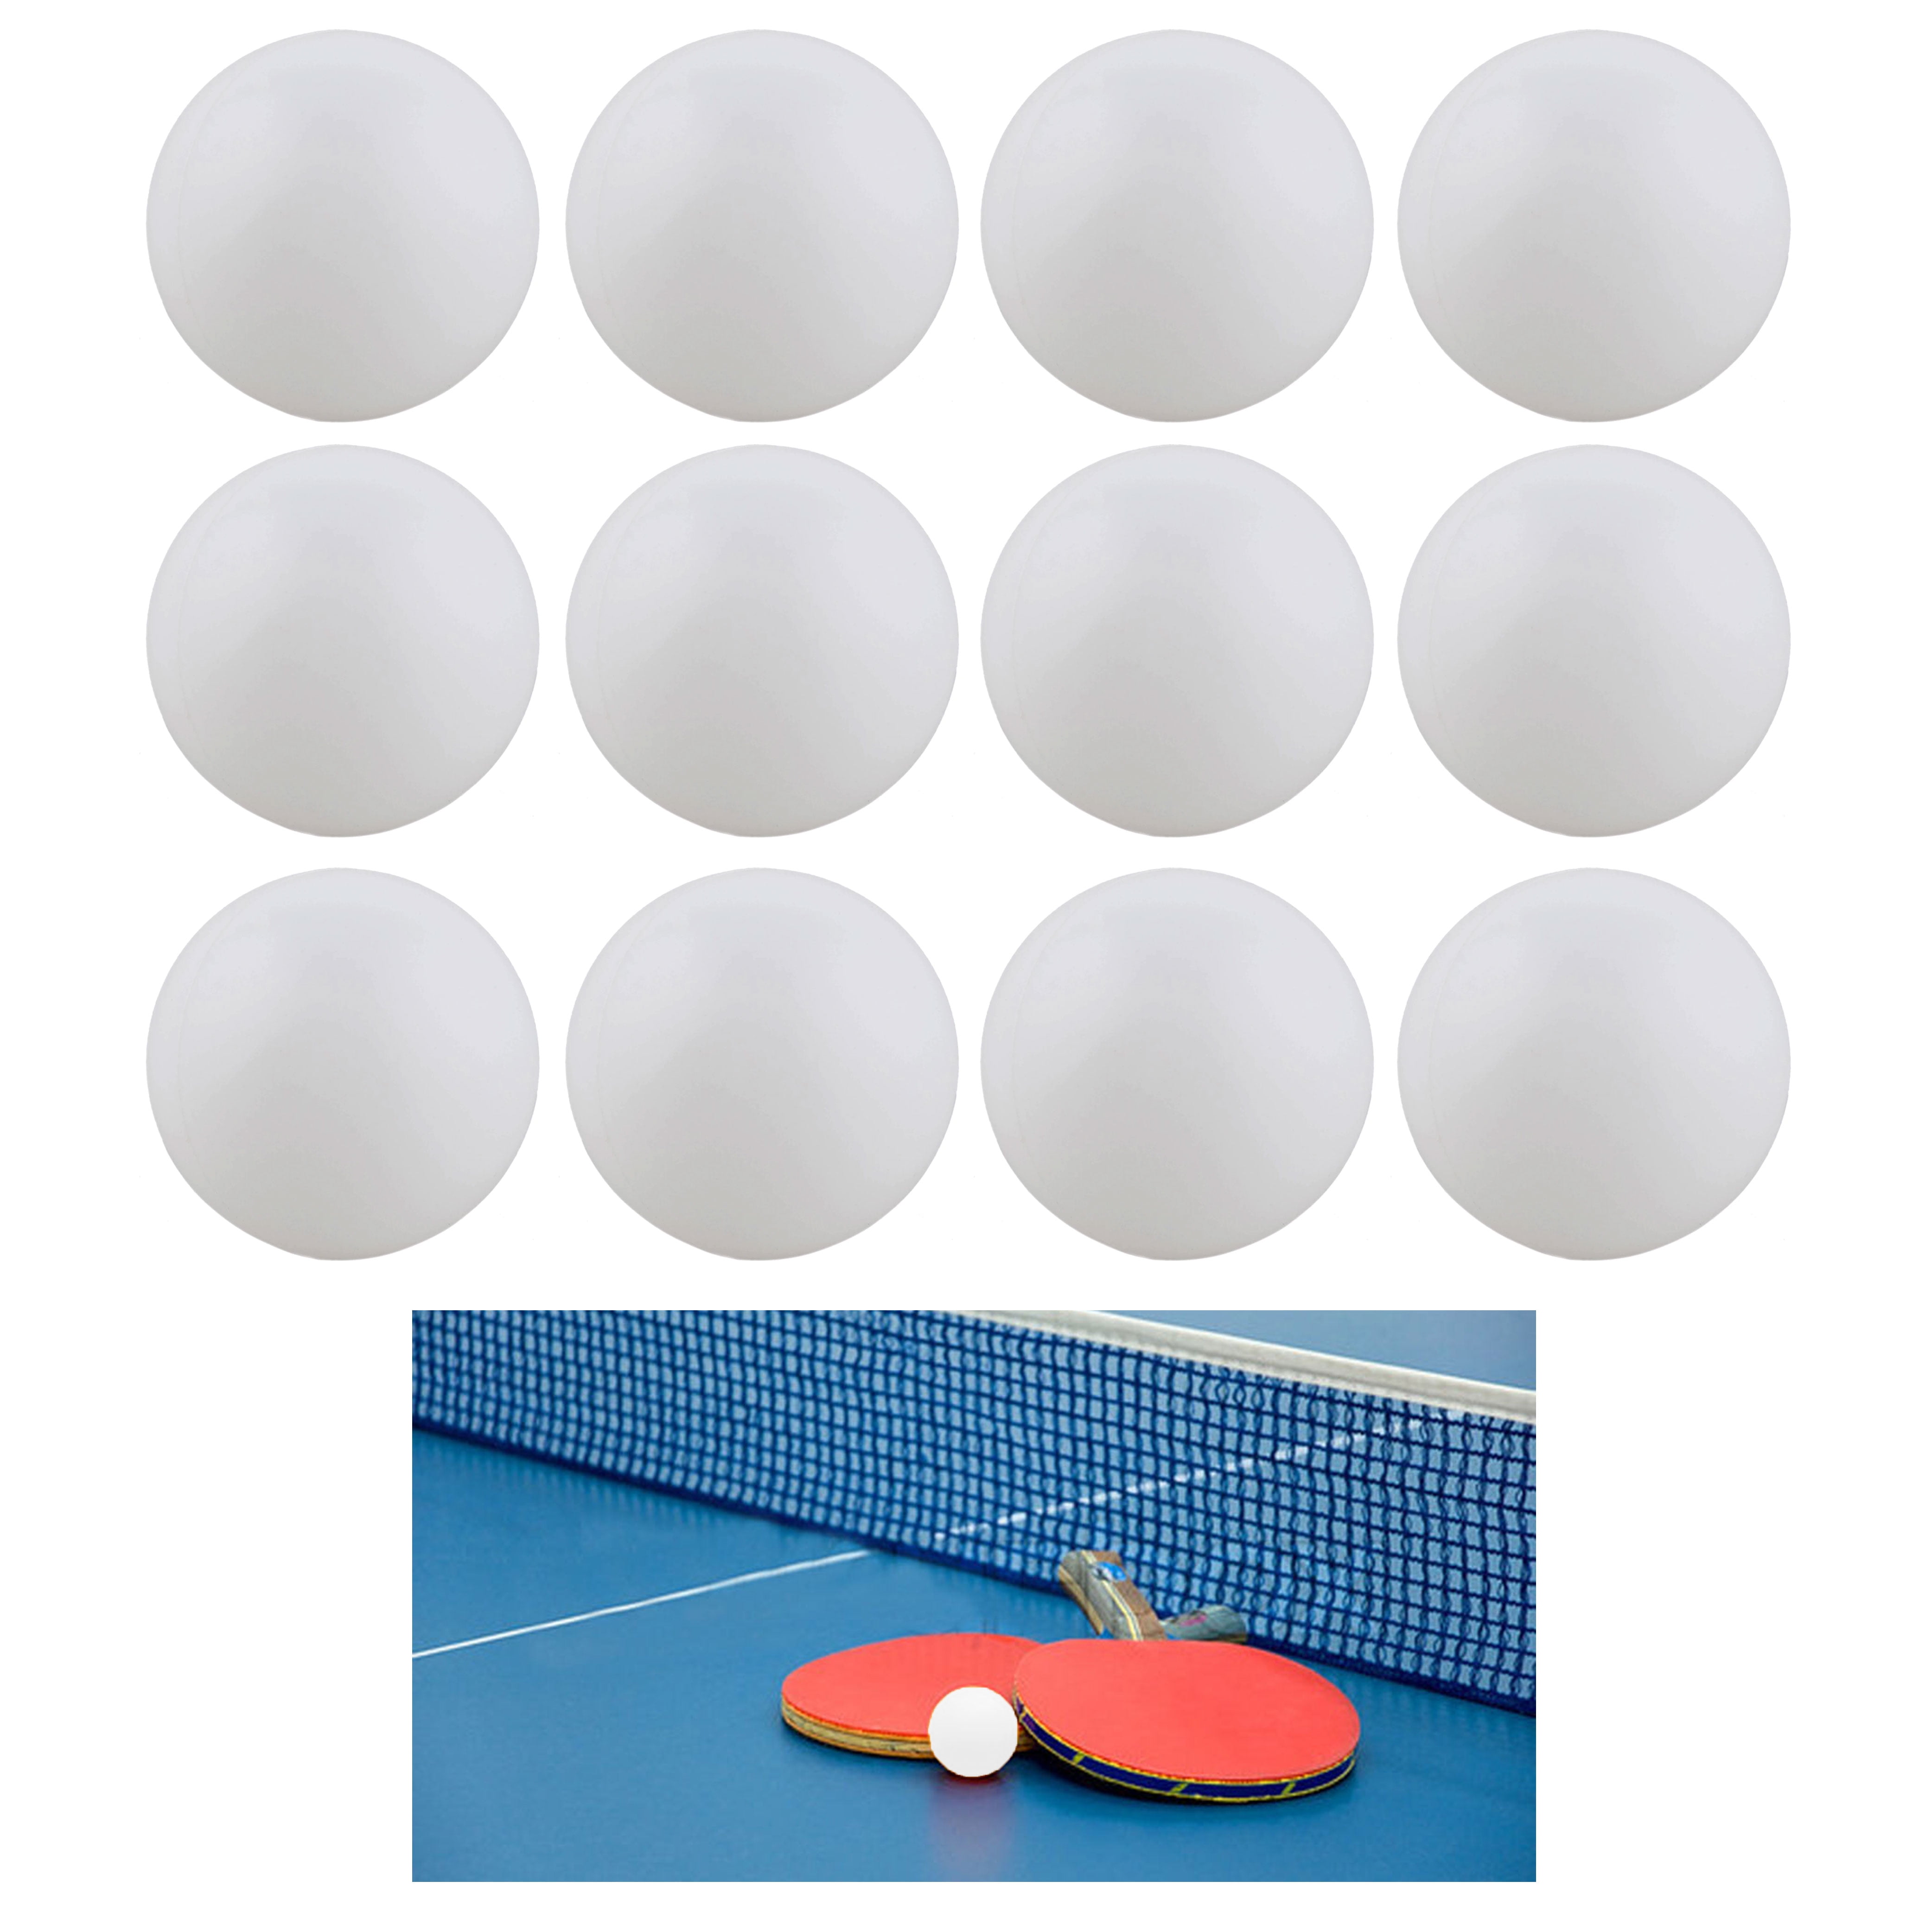 Carnival Games 144 Practice Ping Pong Balls Beer Pong 38mm Table Tennis 